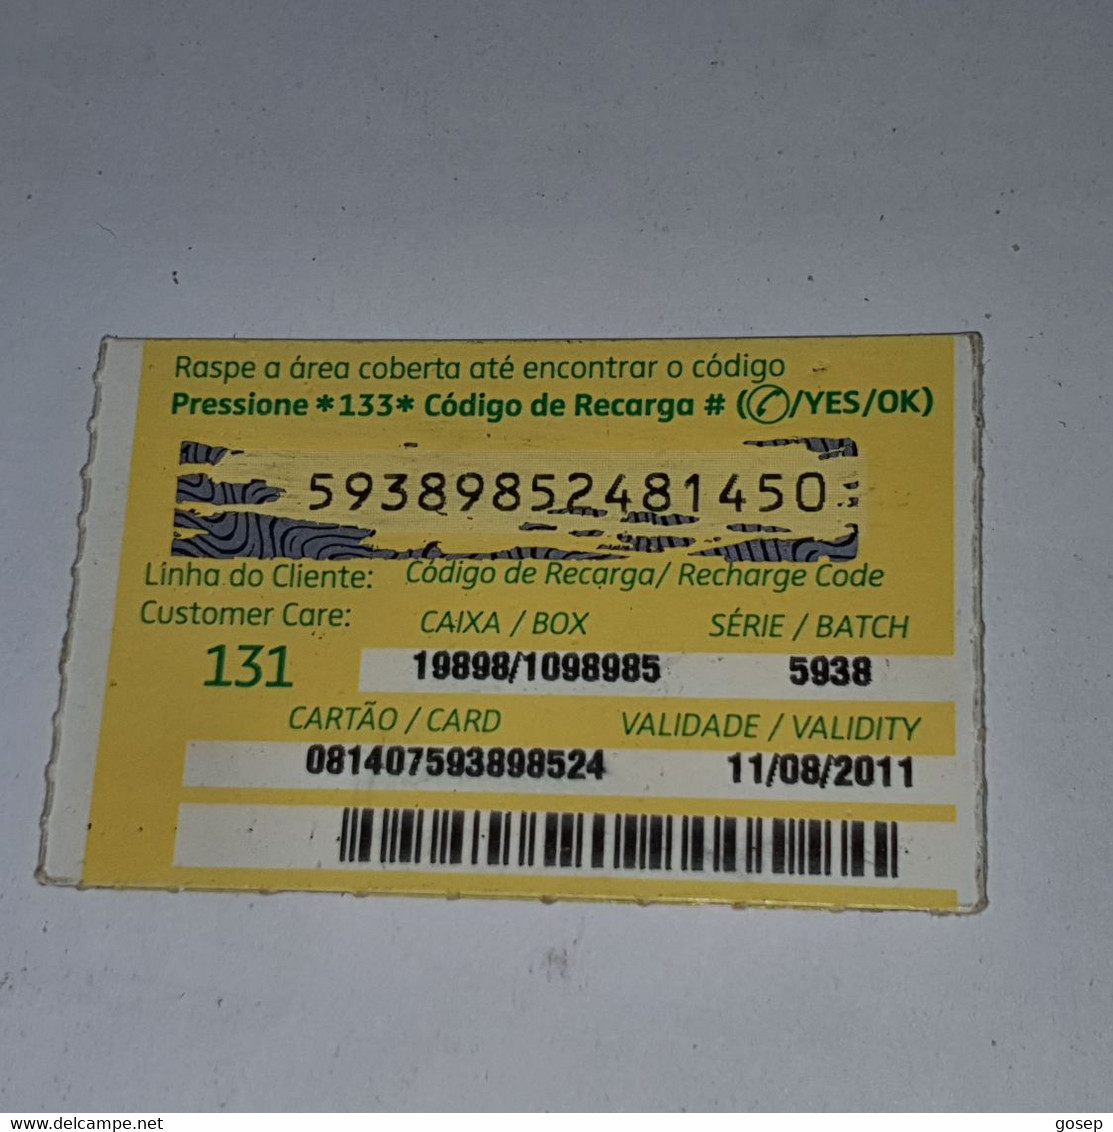 Mozambique-(MZ-MCE-REC-0003/C/2)-(8)-girl And Boy-(59389852481450)-(11/8/2011)-used Card - Mozambique